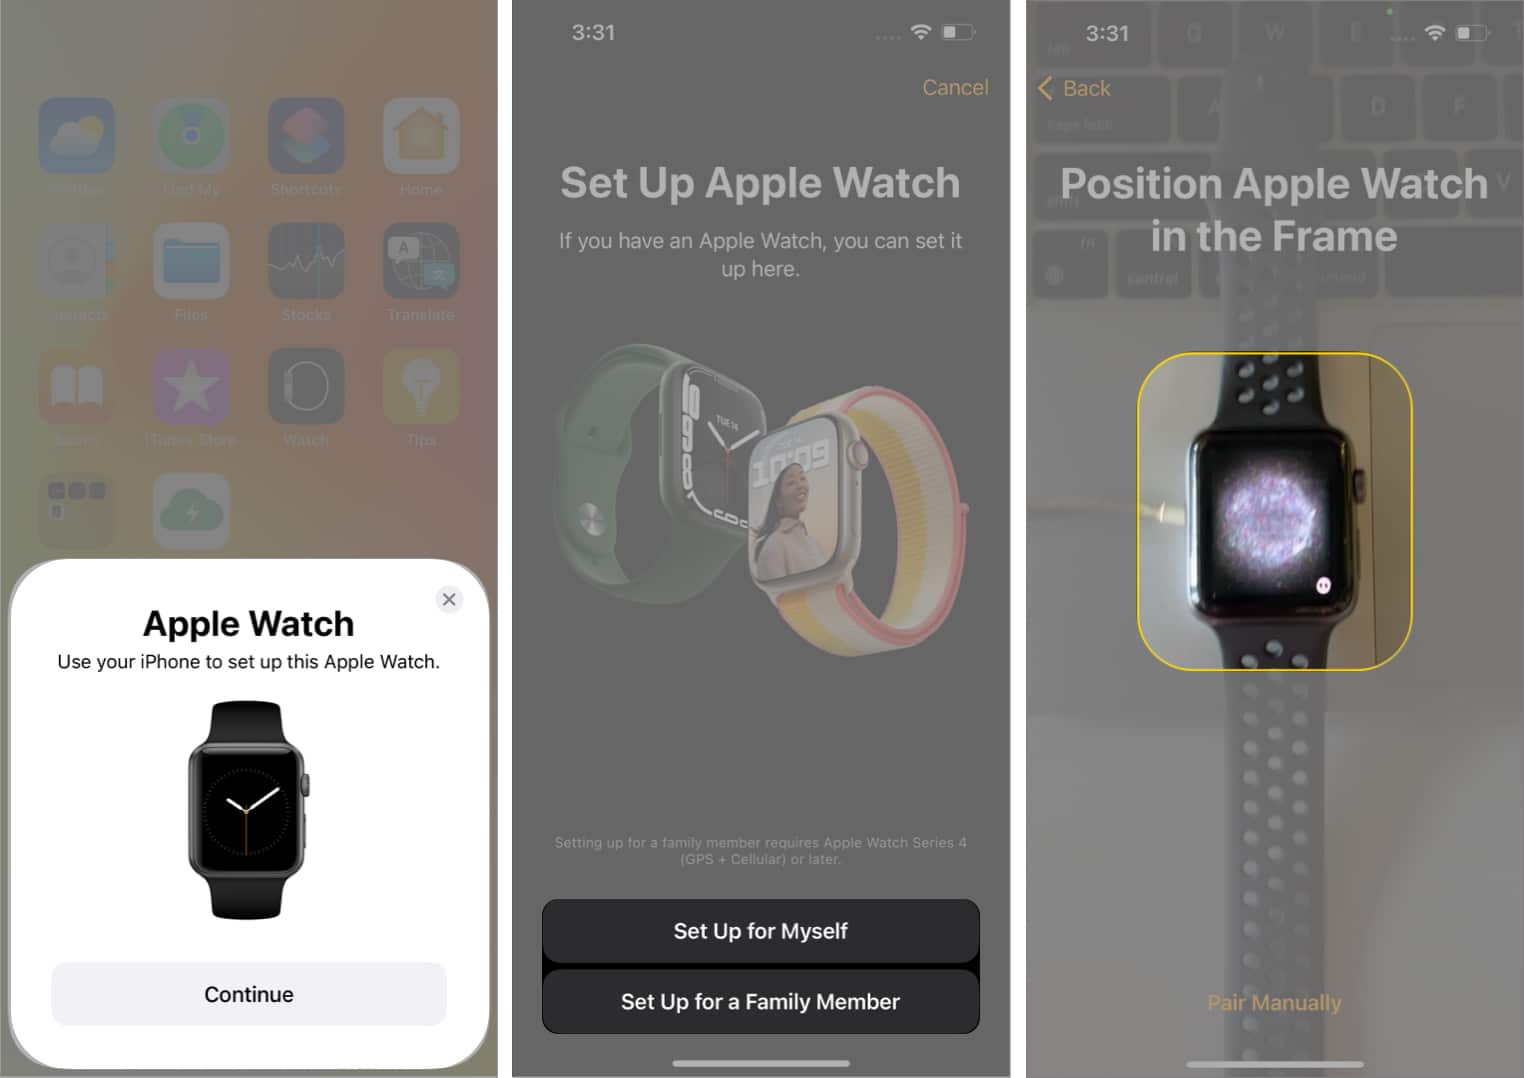 Position Apple Watch in the Frame to pair with iPhone